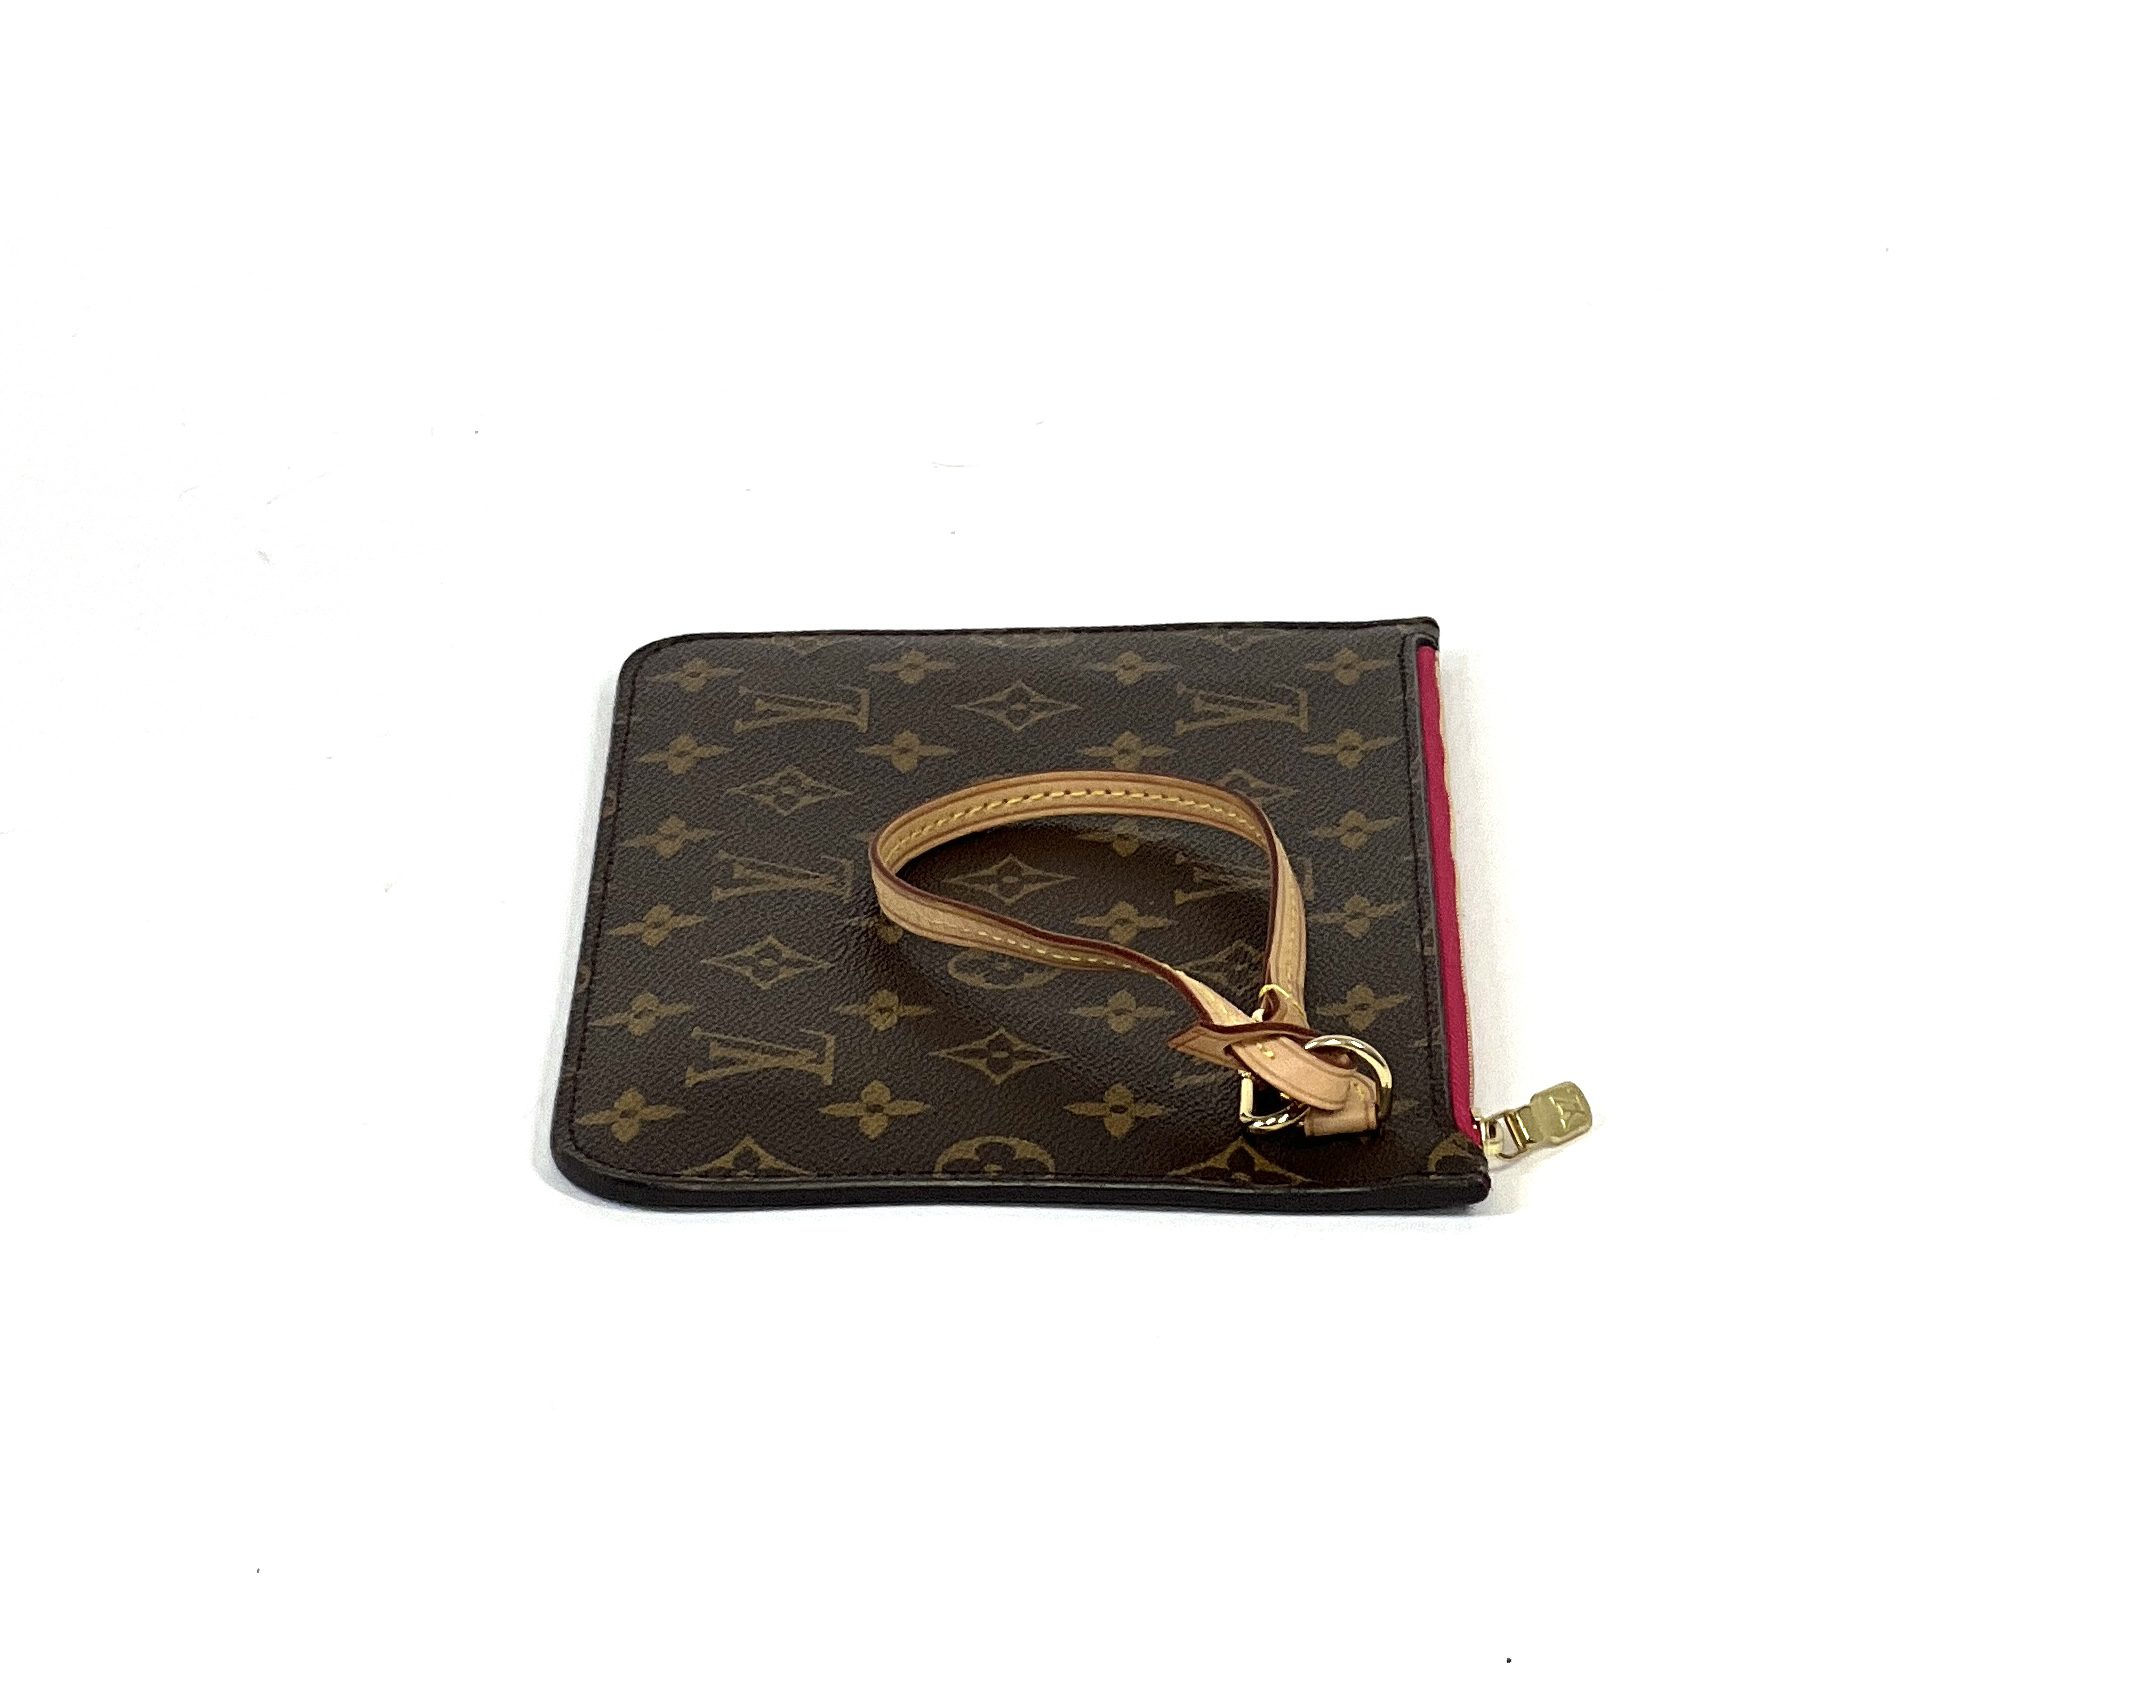 Pouch Converter Kit for Chanel O Case, Chanel Pouch, LV Neverfull